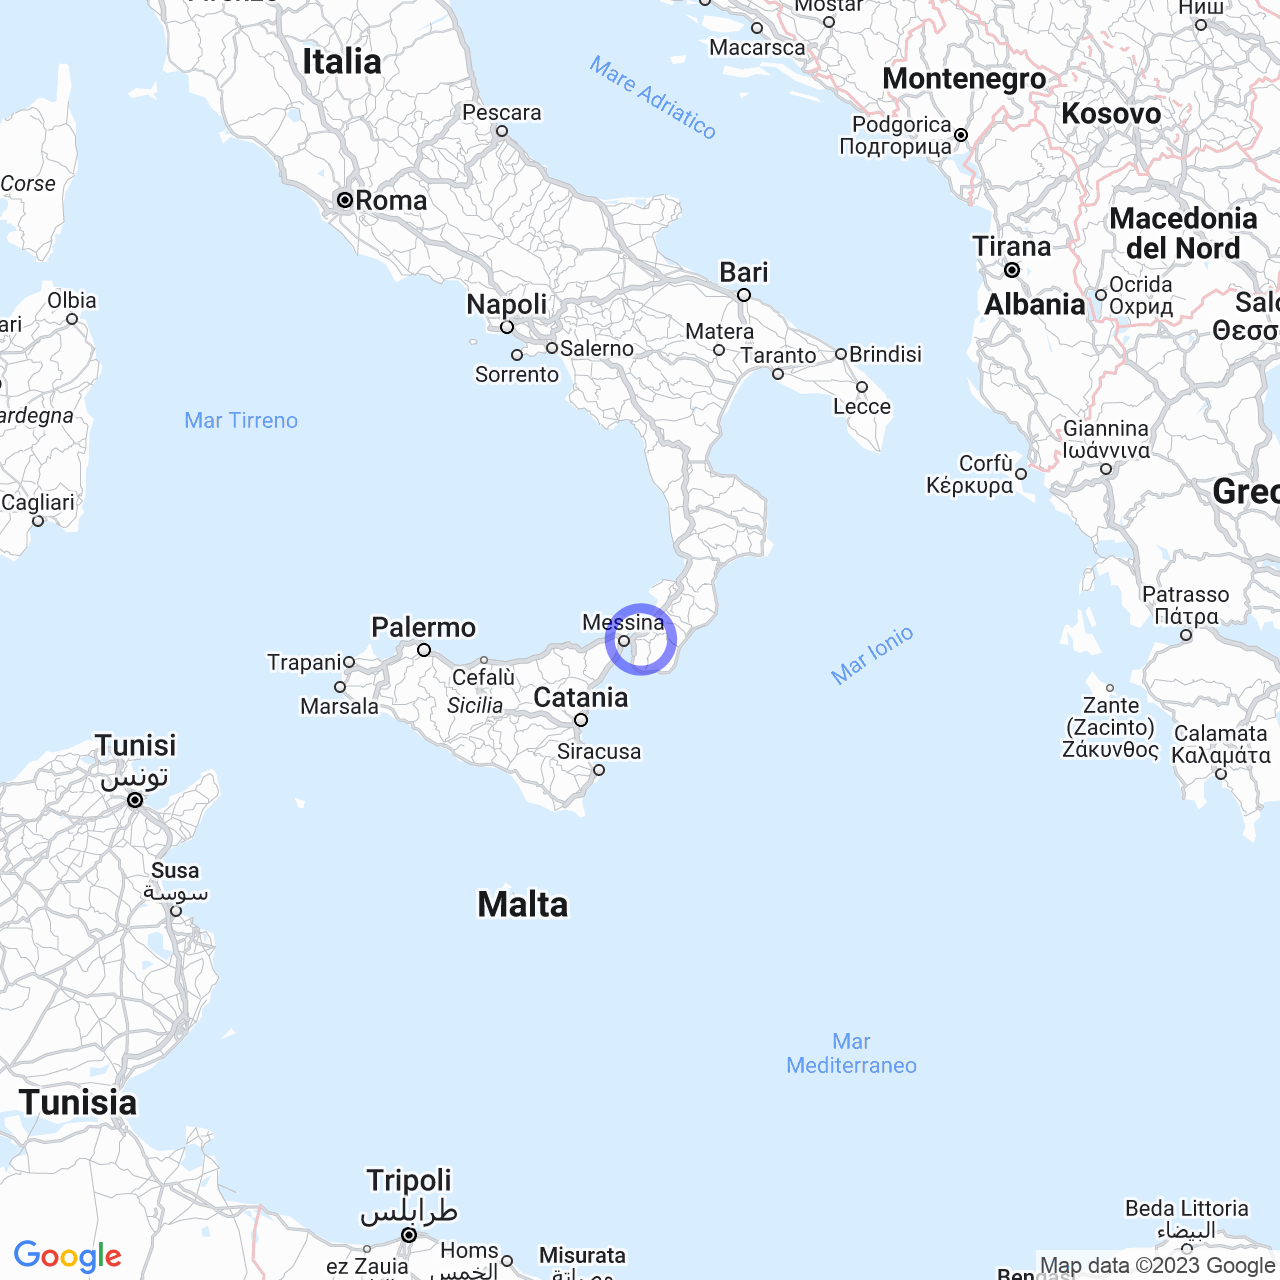 Reggio Calabria: history, geography, and points of interest.